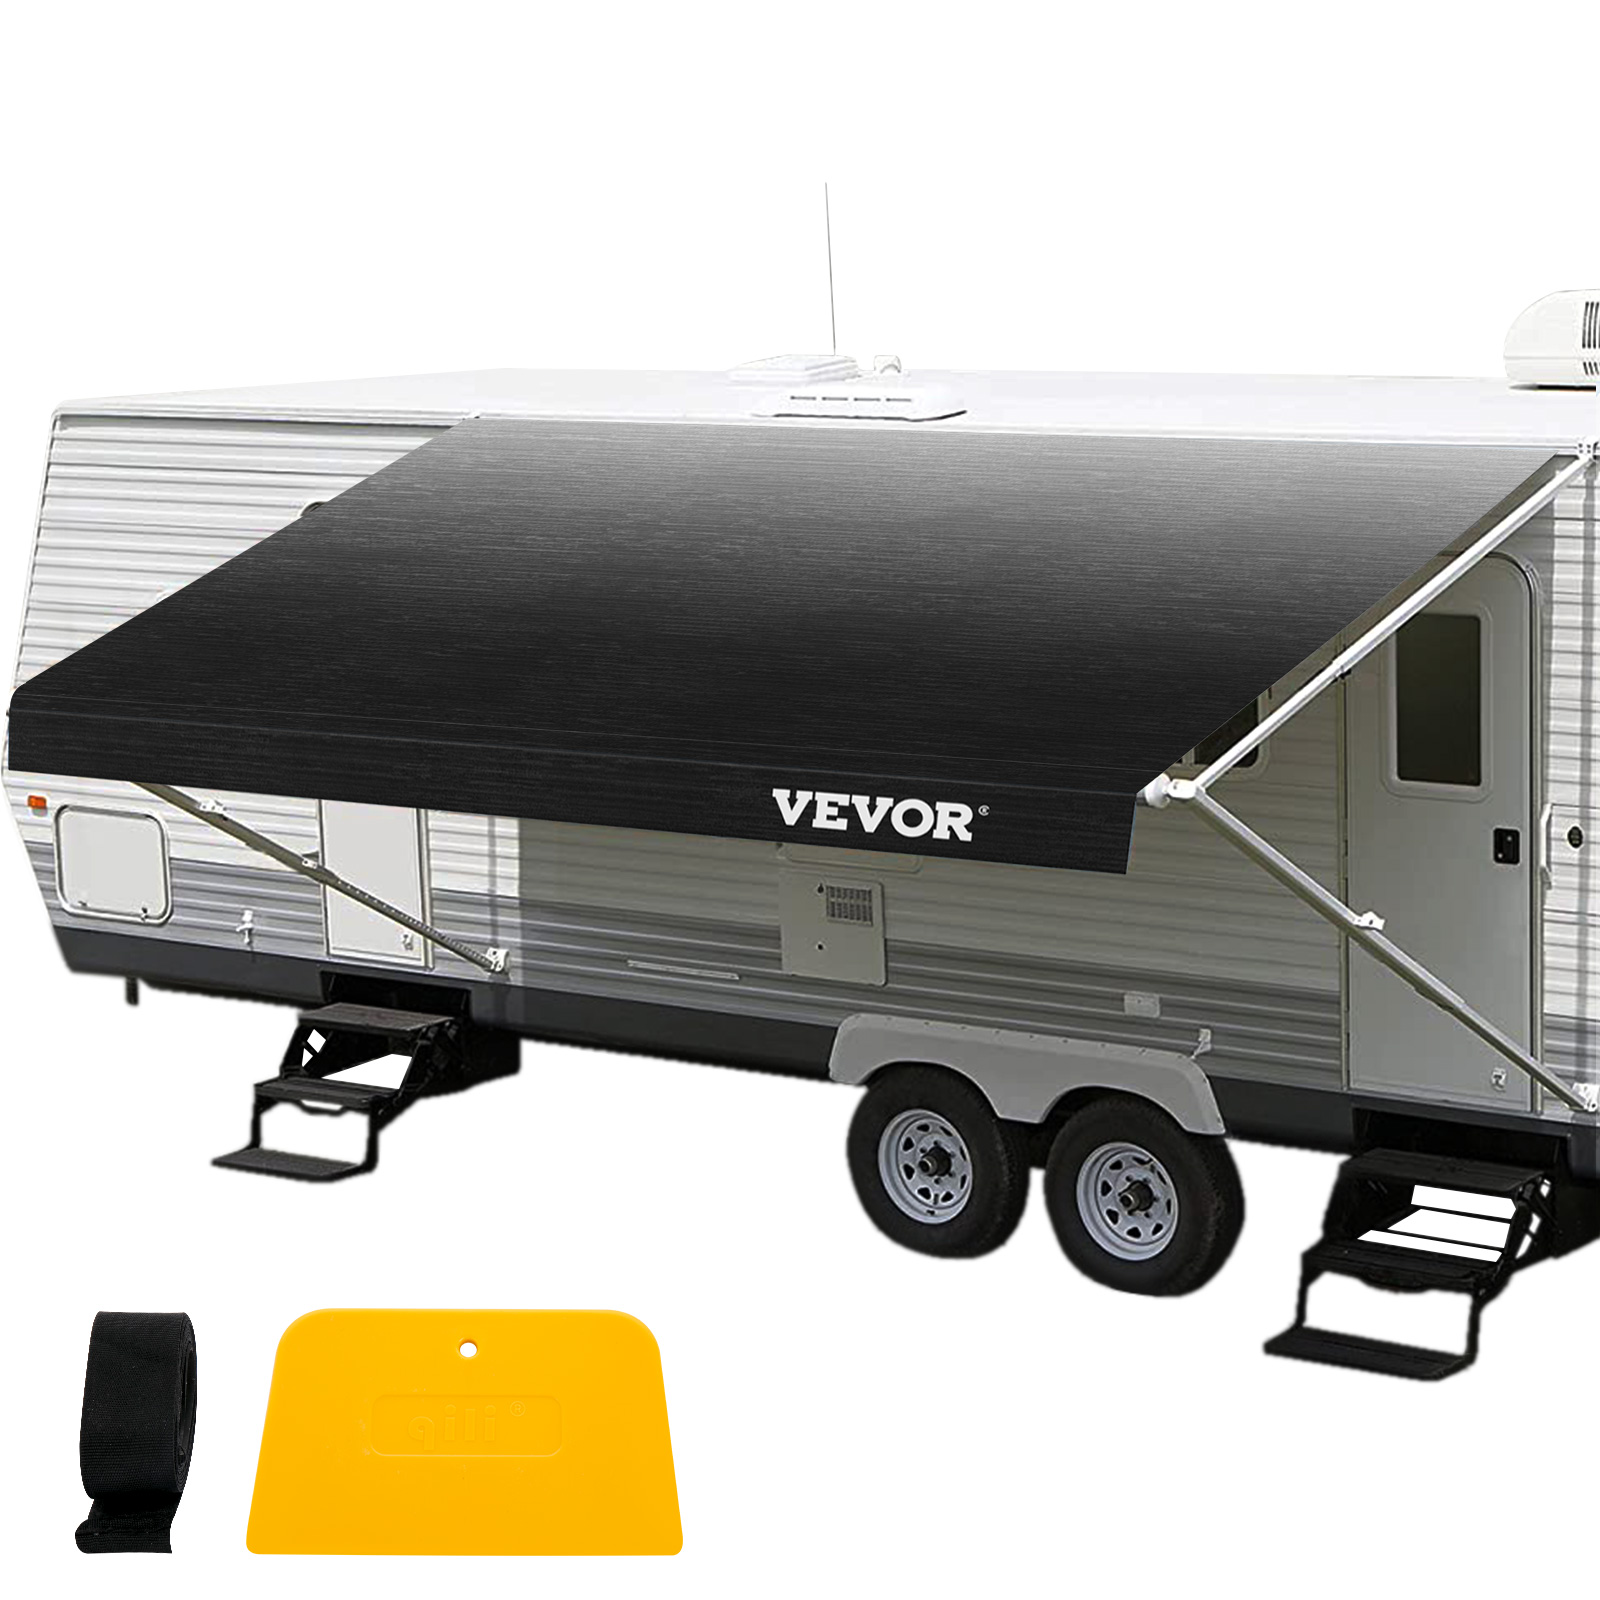 Vevor Rv Awning Fabric 20 'rv Camper Trailer Replacement 20 Ft Charcoal Fade от Vevor Many GEOs